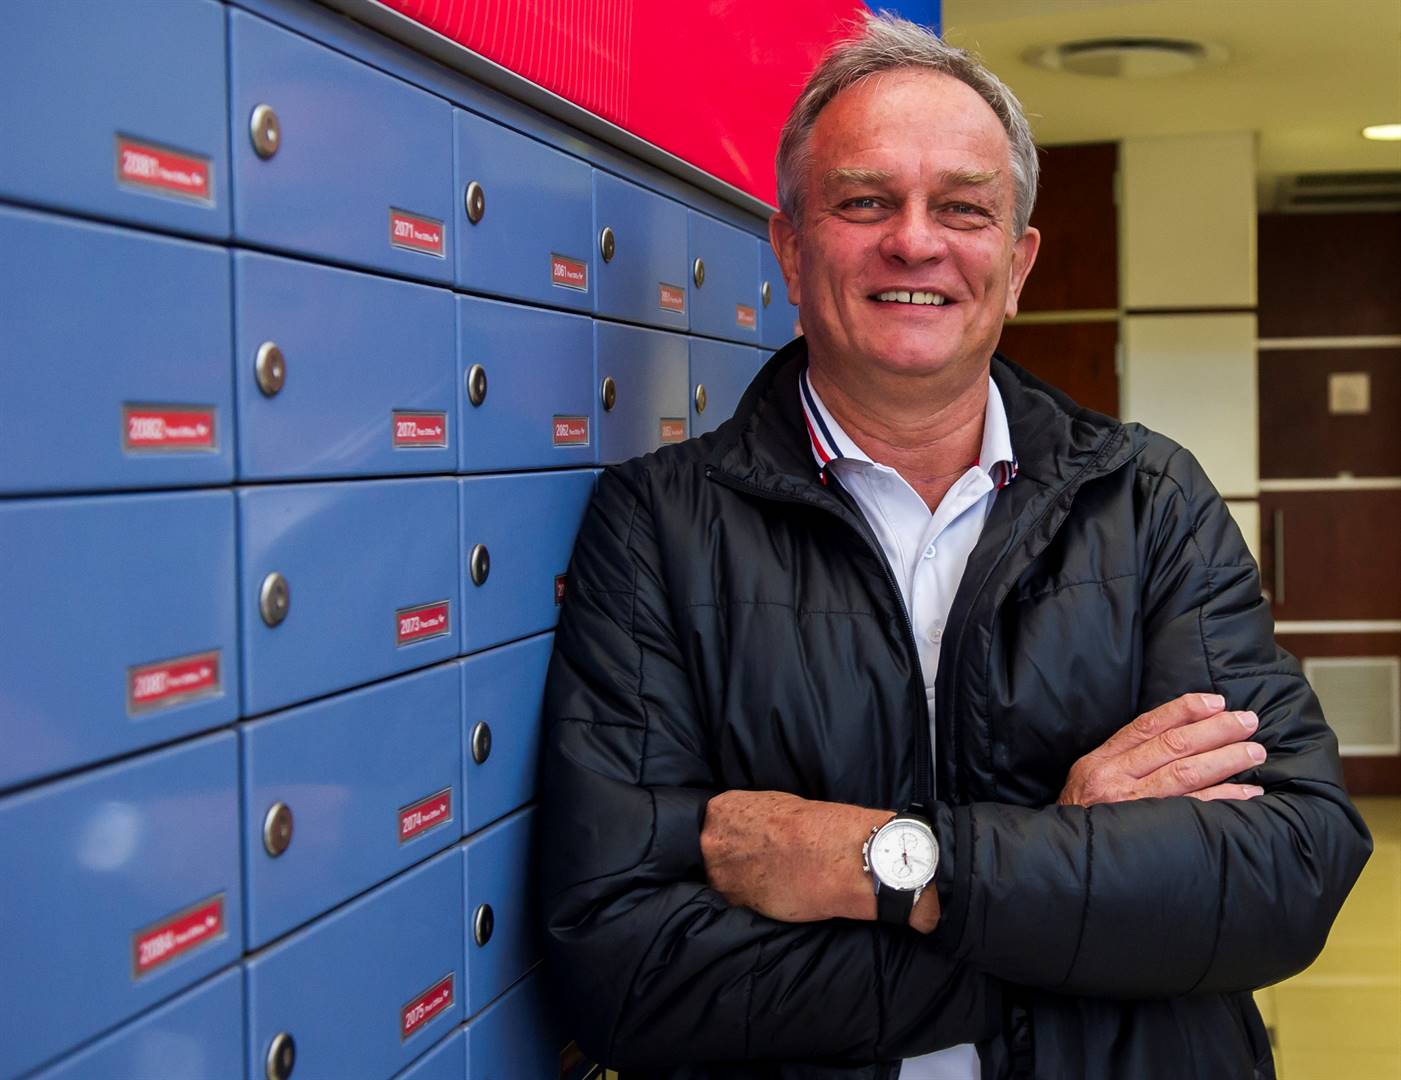 Let me buy Post Office, says its former CEO Mark Barnes Business